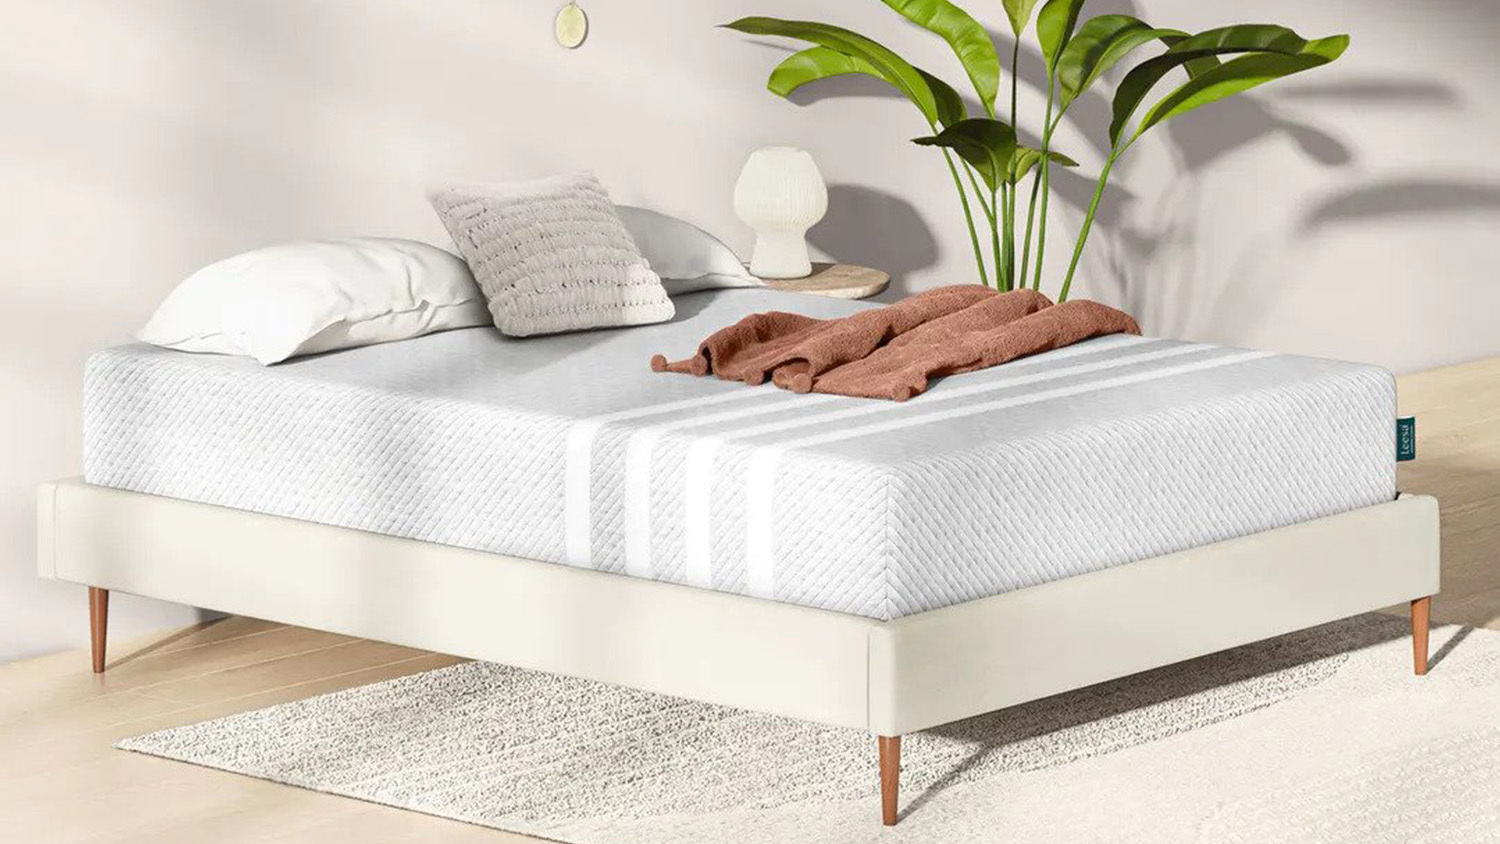 Leesa launches new hybrid mattress for overheated, restless sleepers